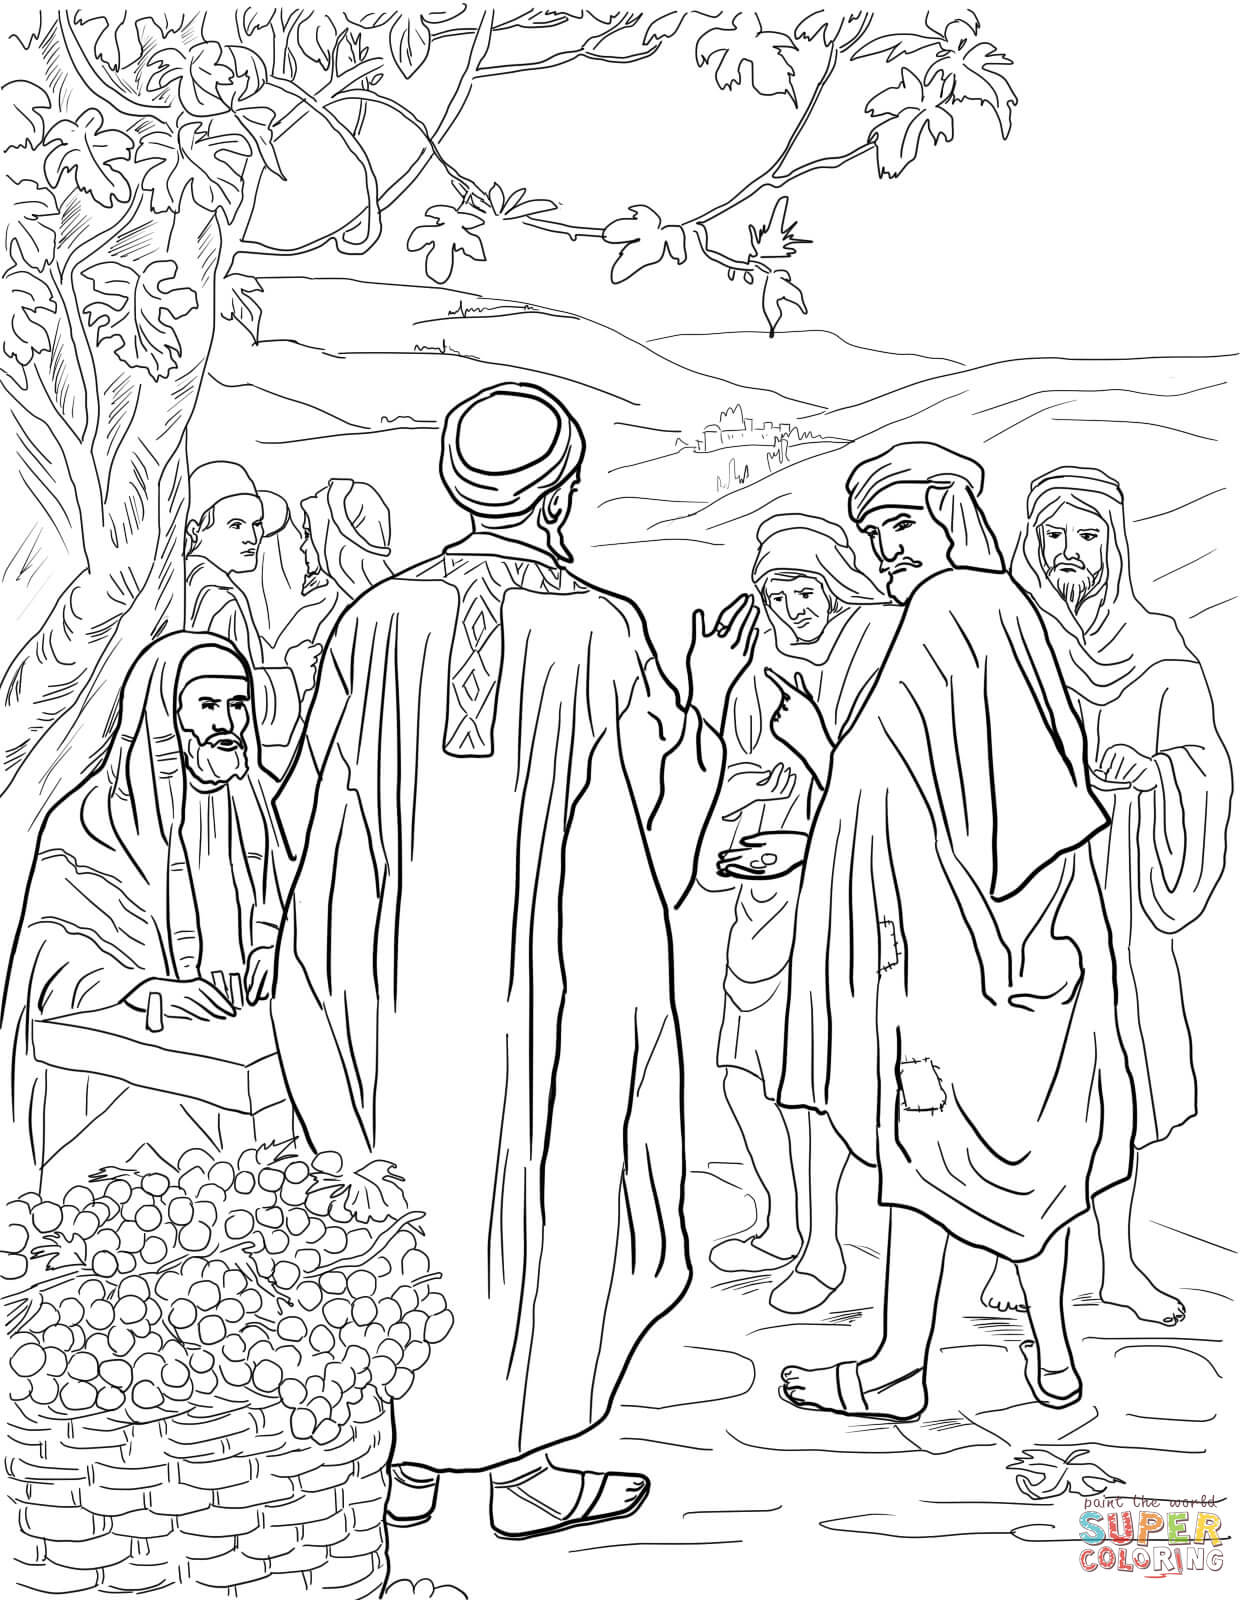 Kids sermon parable of the workers in the vineyard